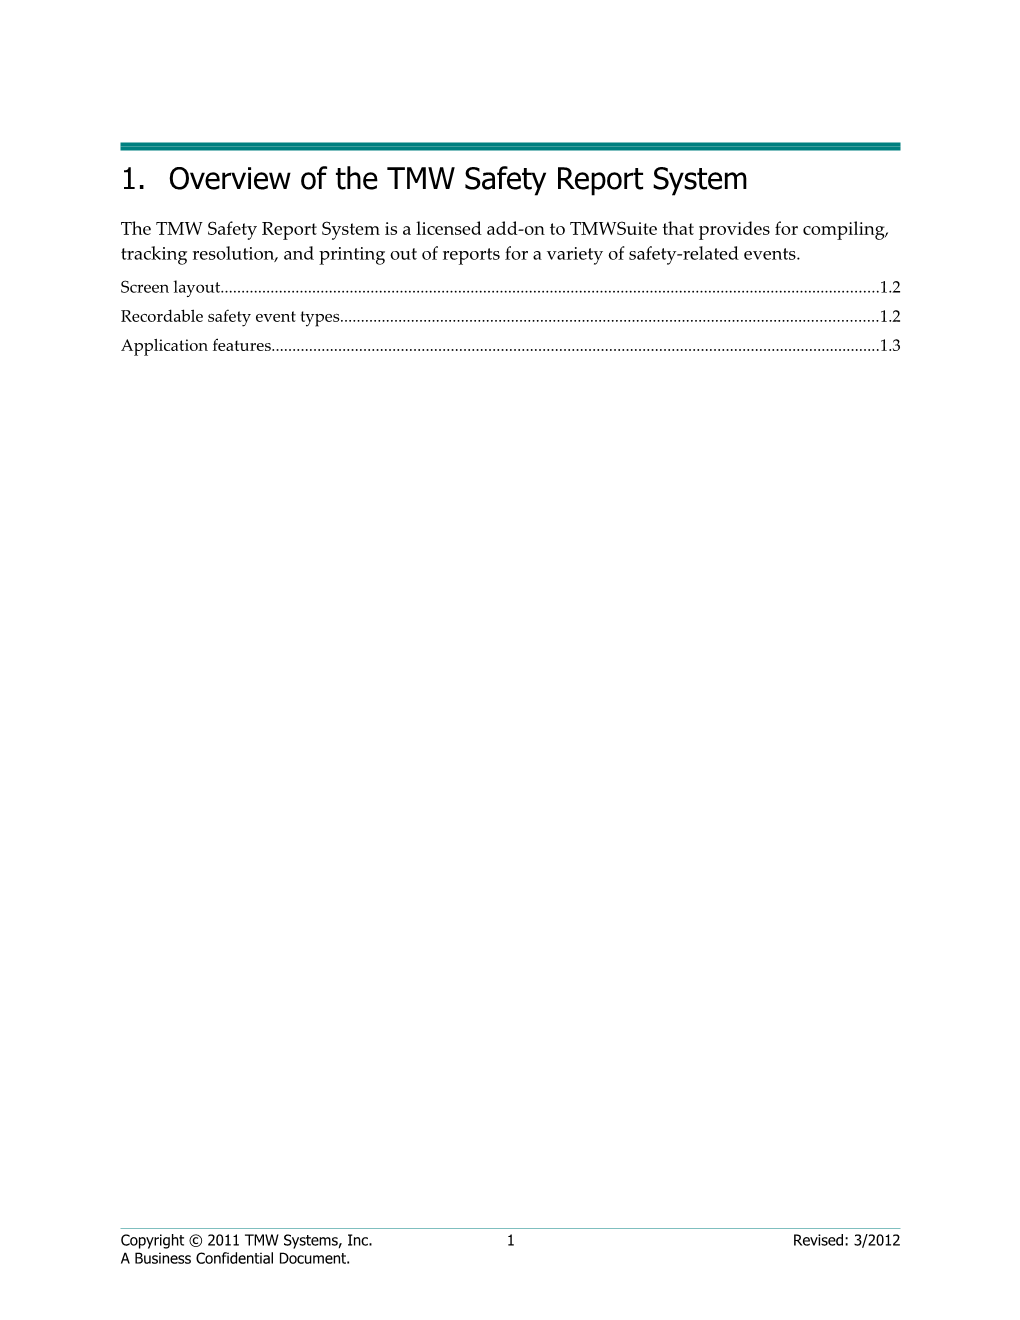 Overview of the Safety Report System